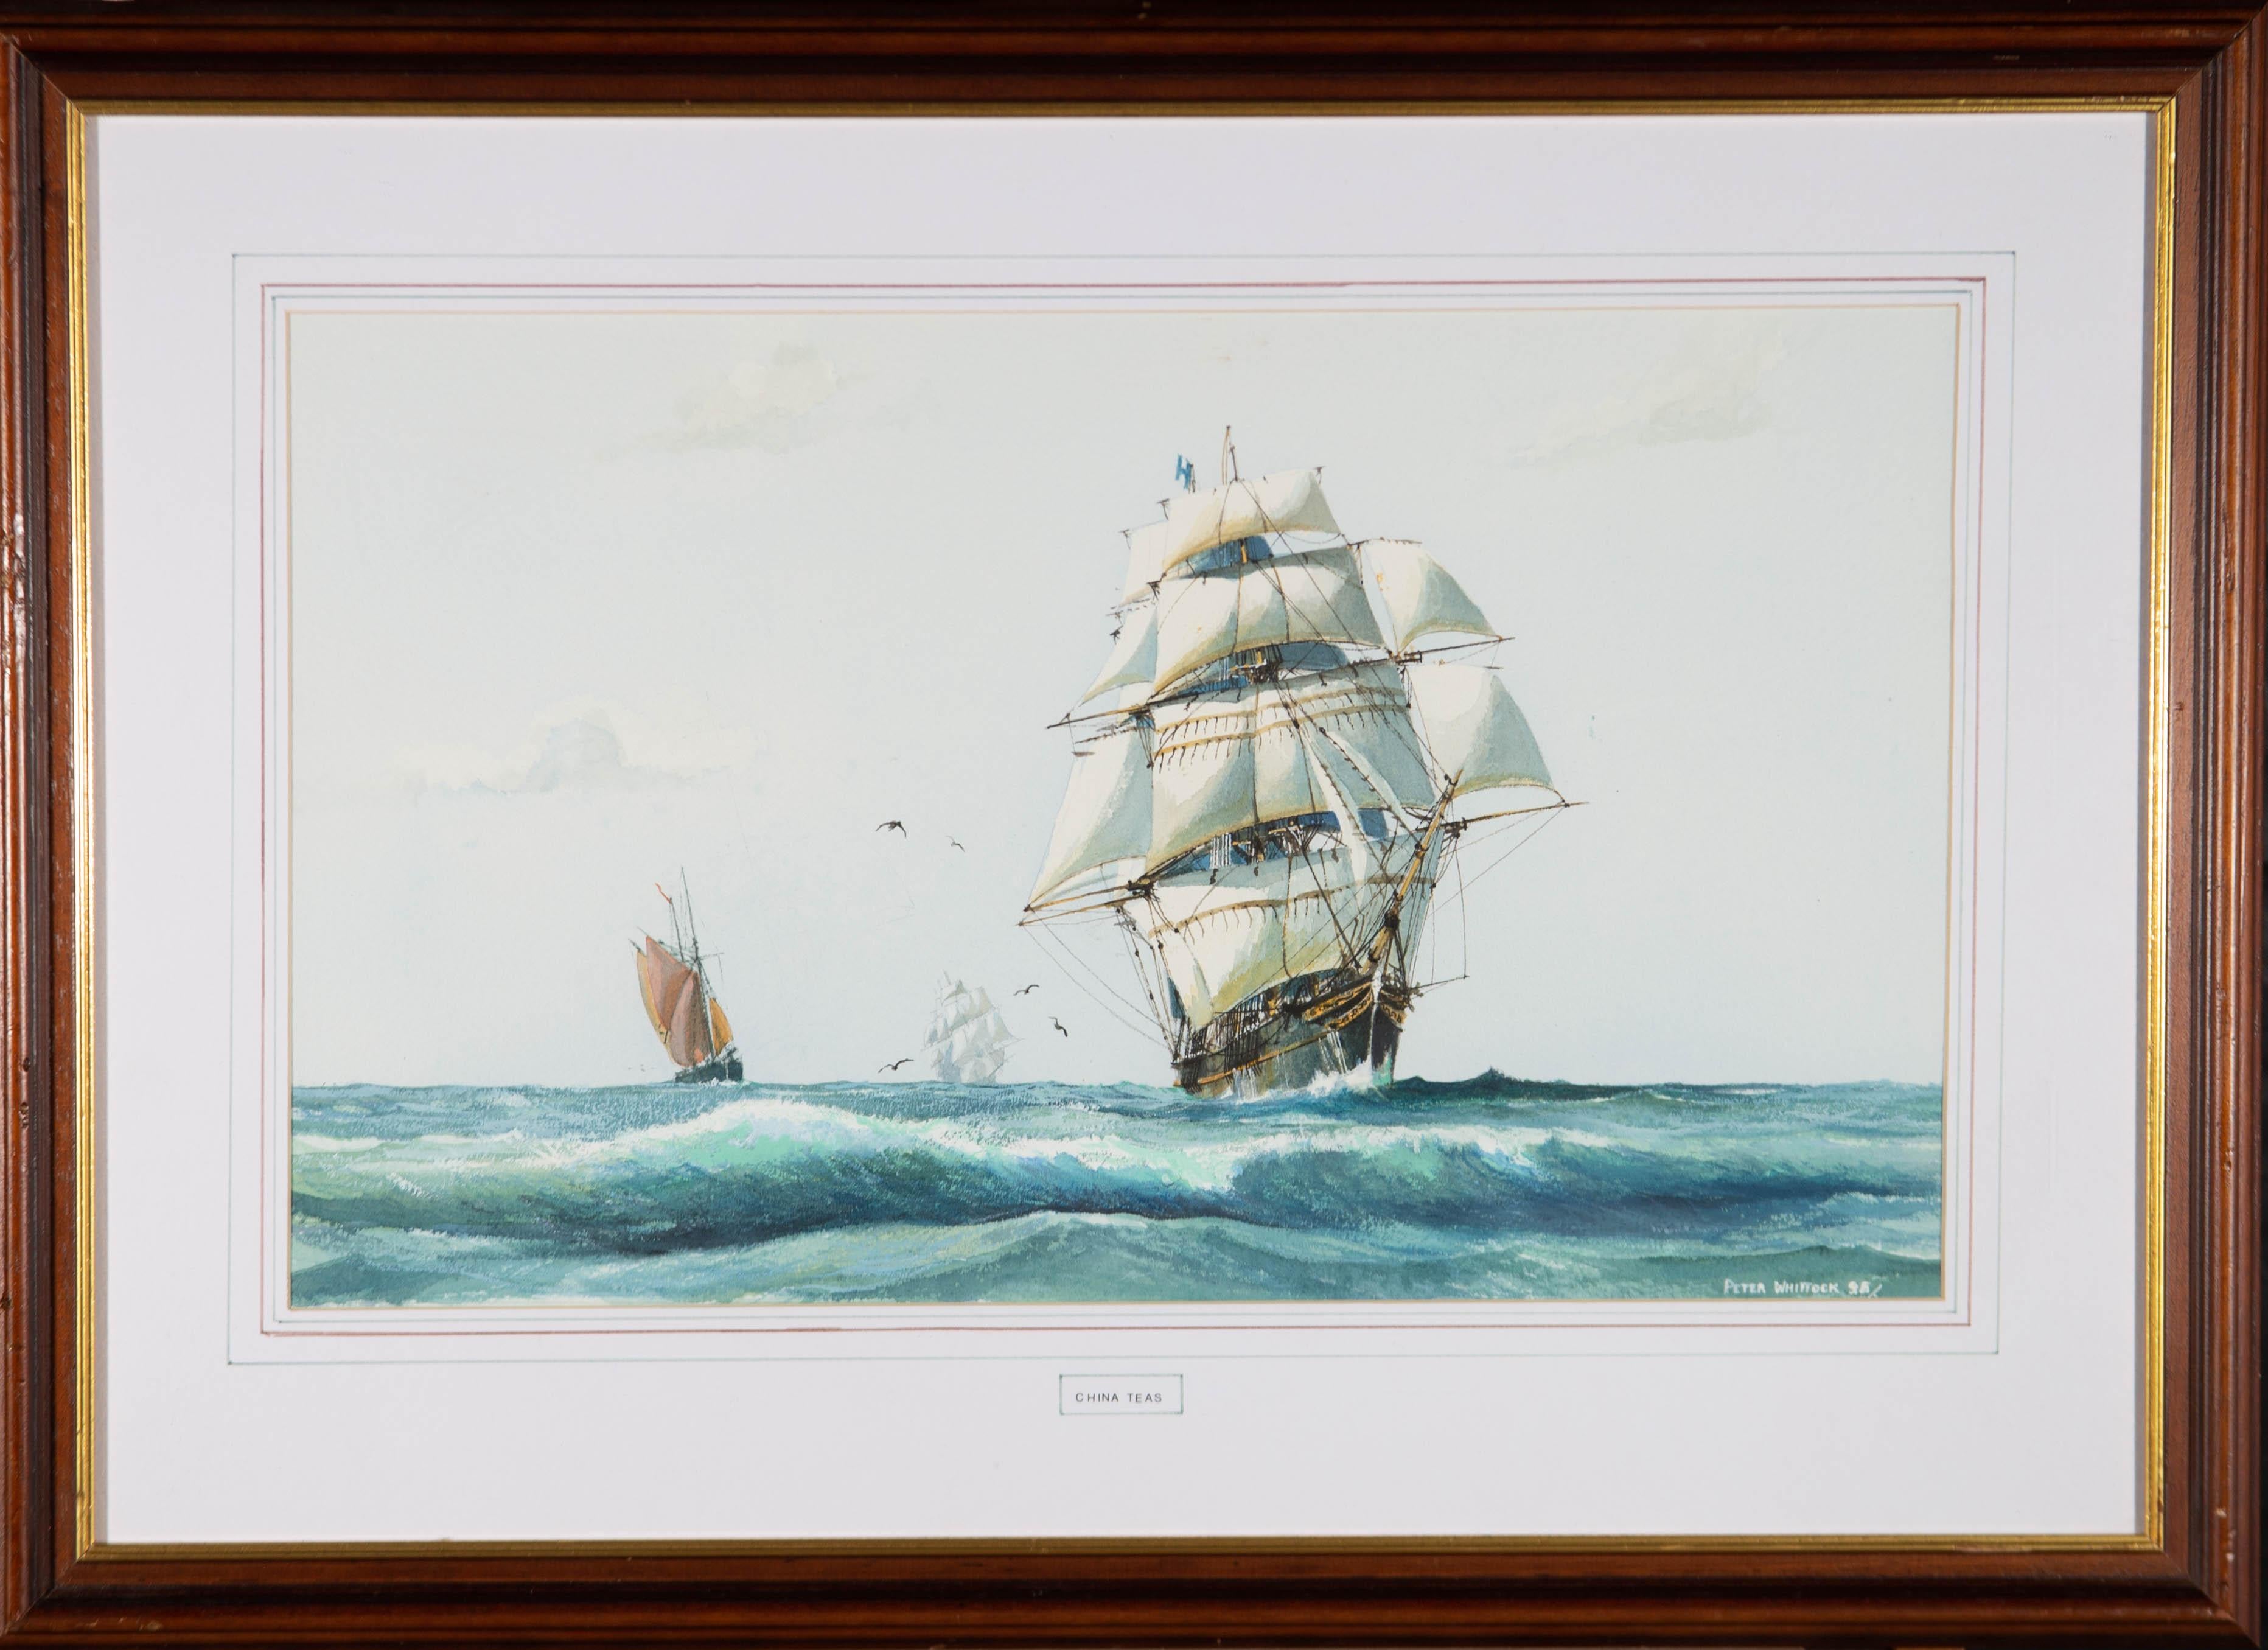 A watercolour and body colour painting depicting a China tea clipper. Presented glazed in a white mount and a wooden frame with a gilt-effect inner edge. The title is inscribed at the centre of the lower edge of the mount. Signed and dated to the